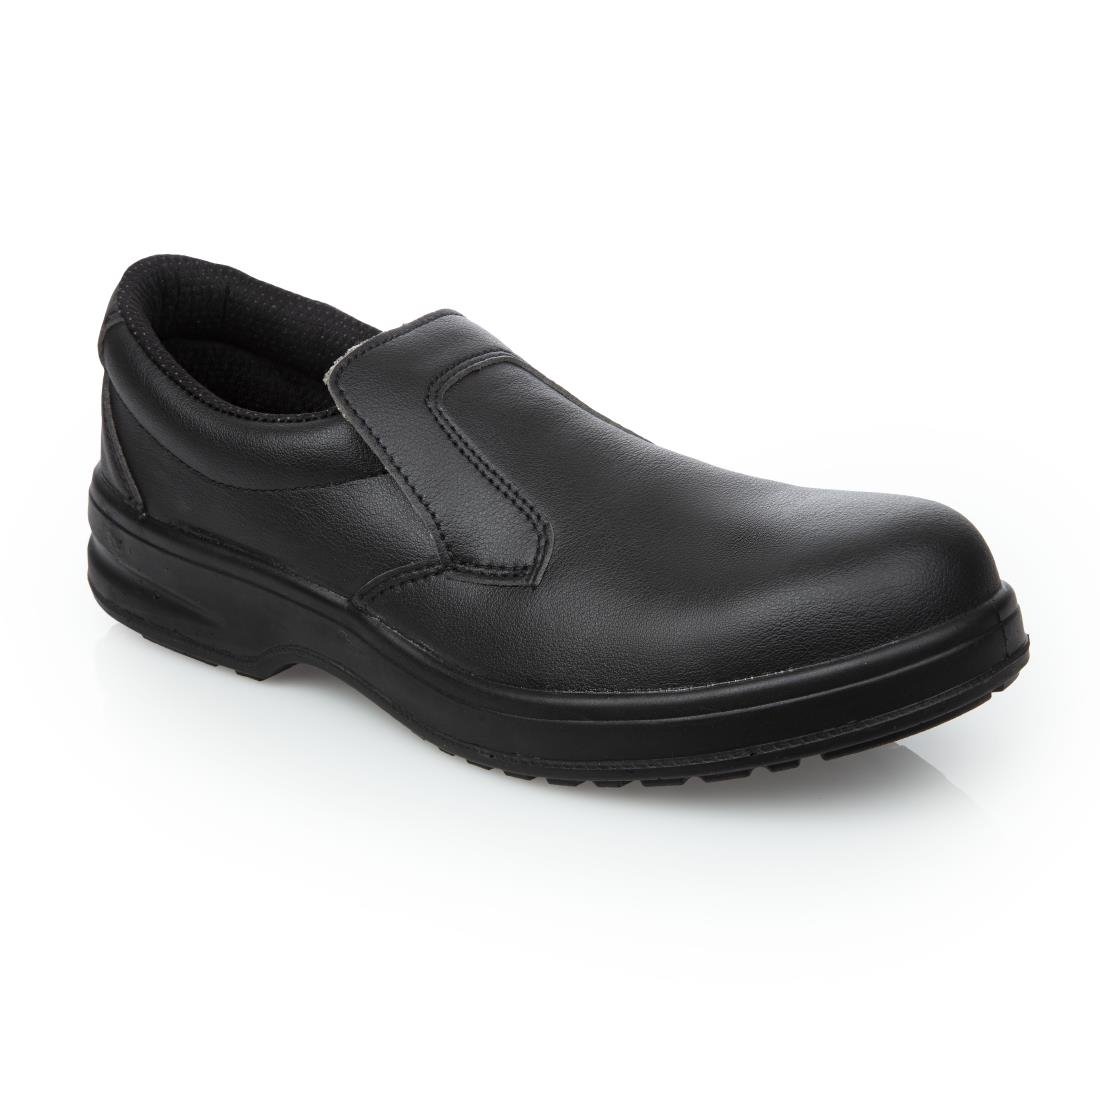 A845-42 Slipbuster Lite Slip On Safety Shoes Black 42 JD Catering Equipment Solutions Ltd